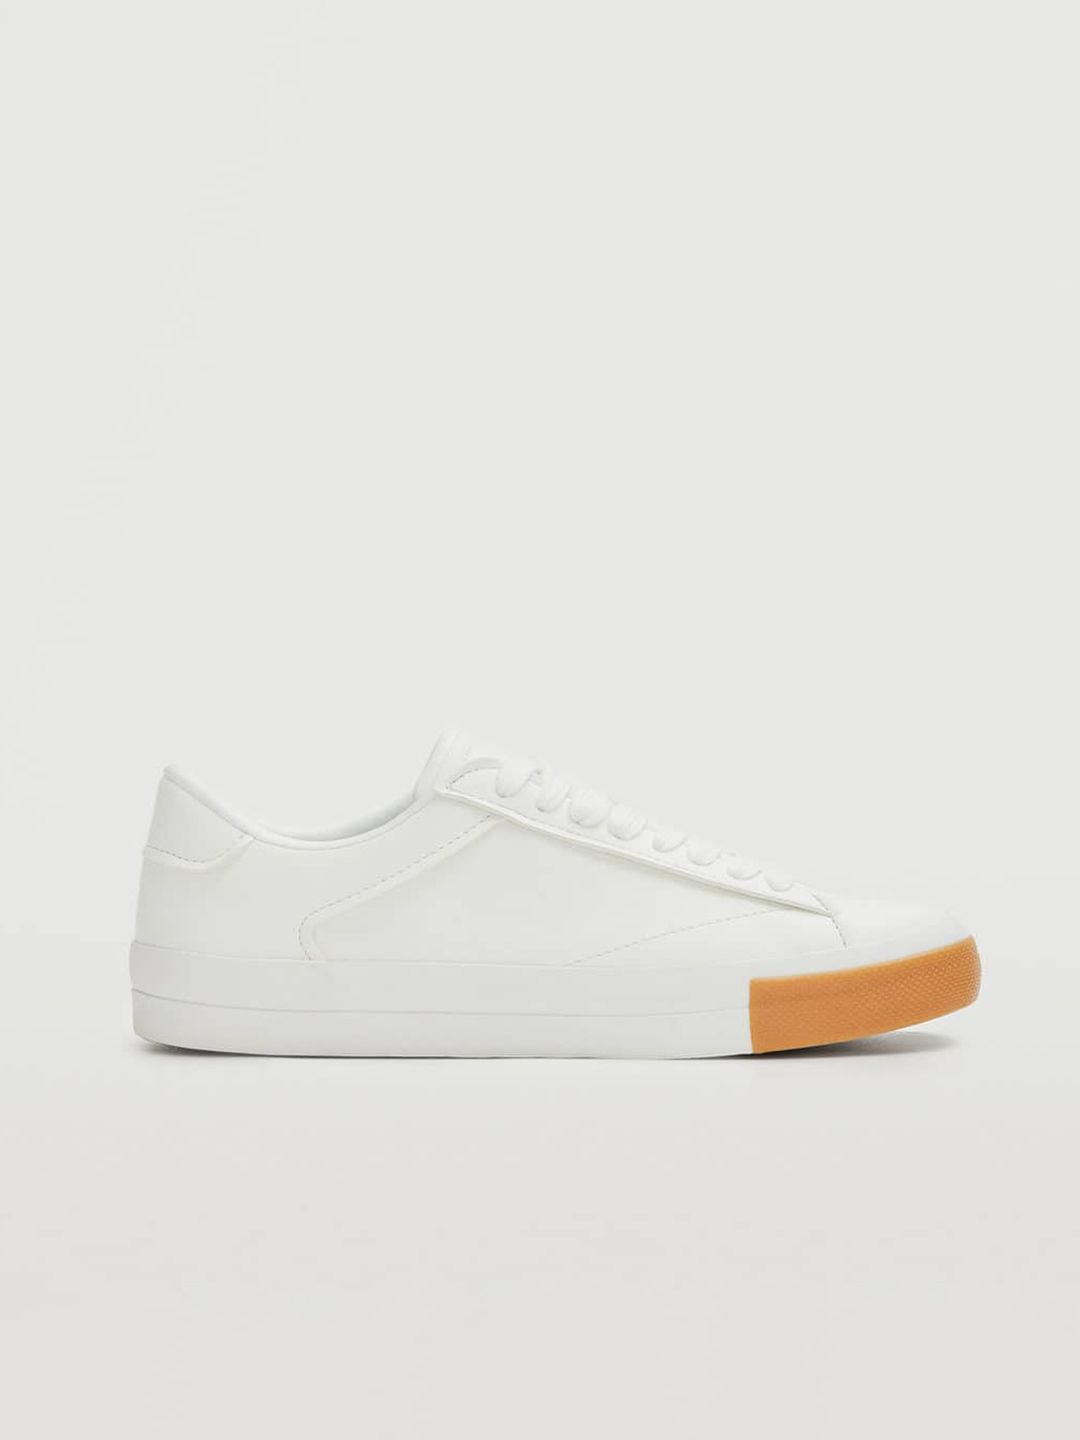 MANGO Women White Solid Lace-Ups Sneakers Price in India